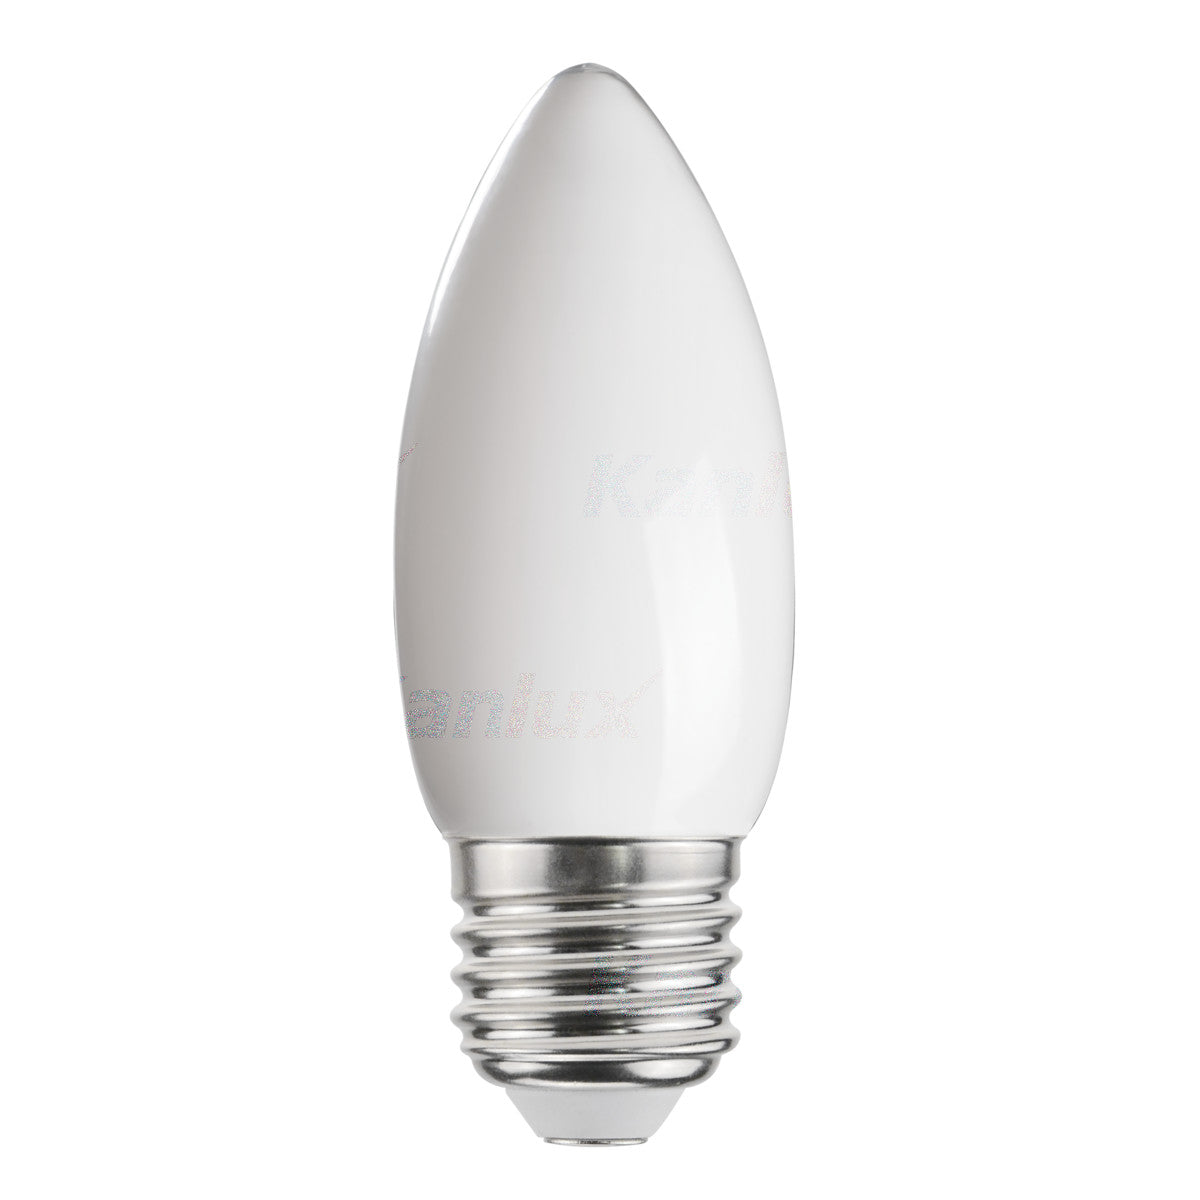 Kanlux XLED C35 E27 6W LED Filament Candle Frosted Light Bulb